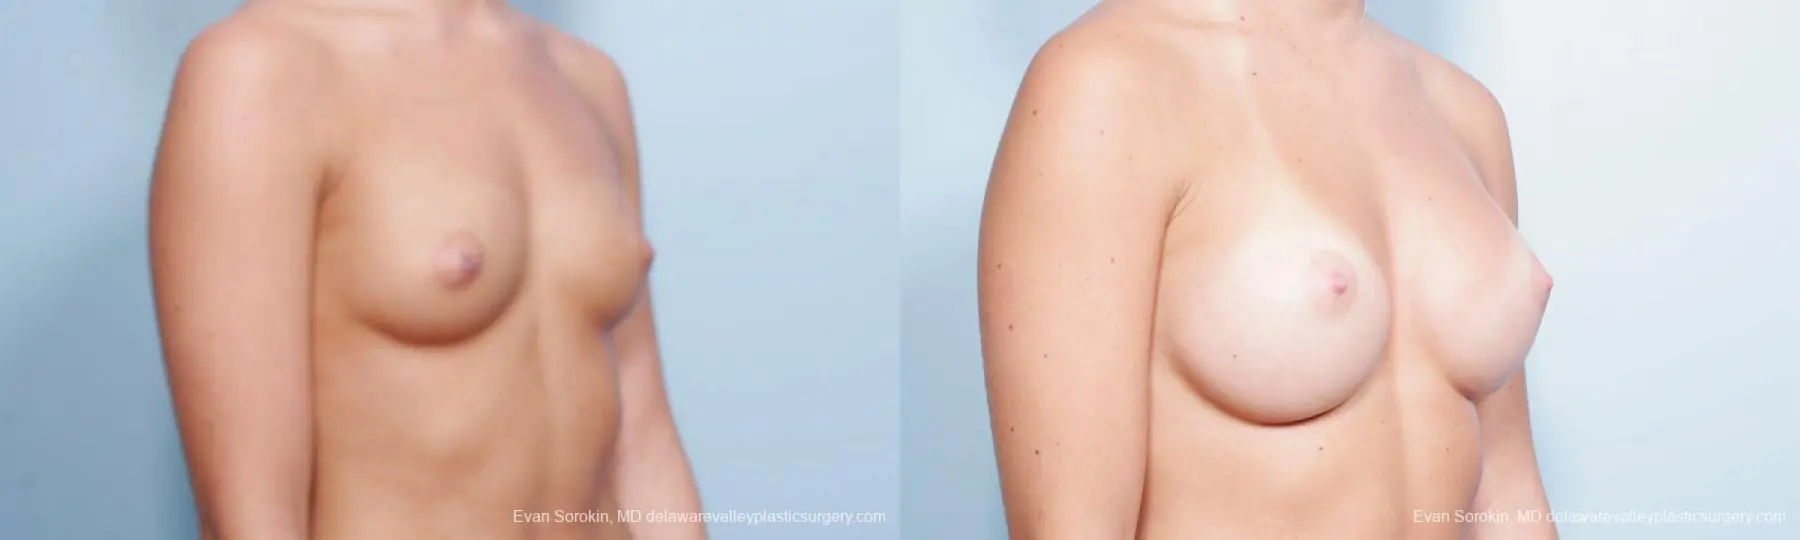 Philadelphia Breast Augmentation 9423 - Before and After 2